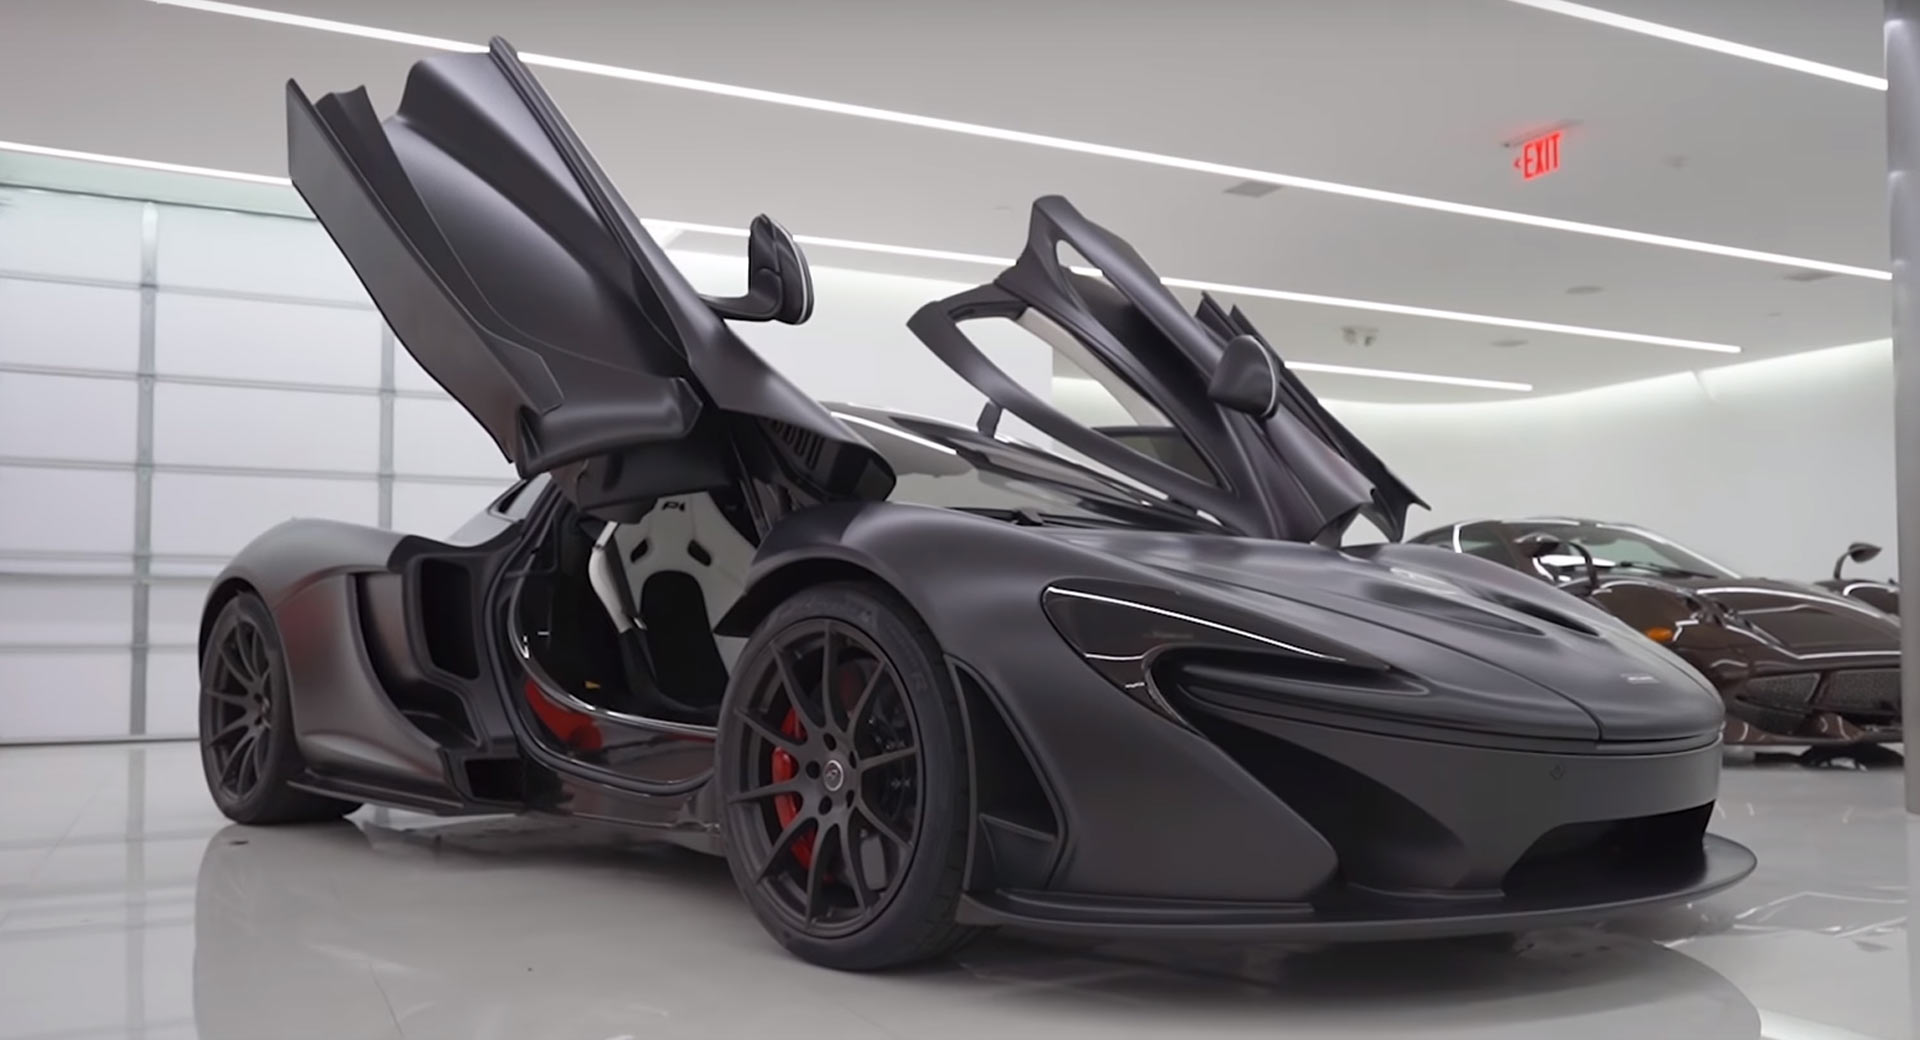 Matte Carbon McLaren P1 Makes Stealth Bombers Look Puny In Comparison